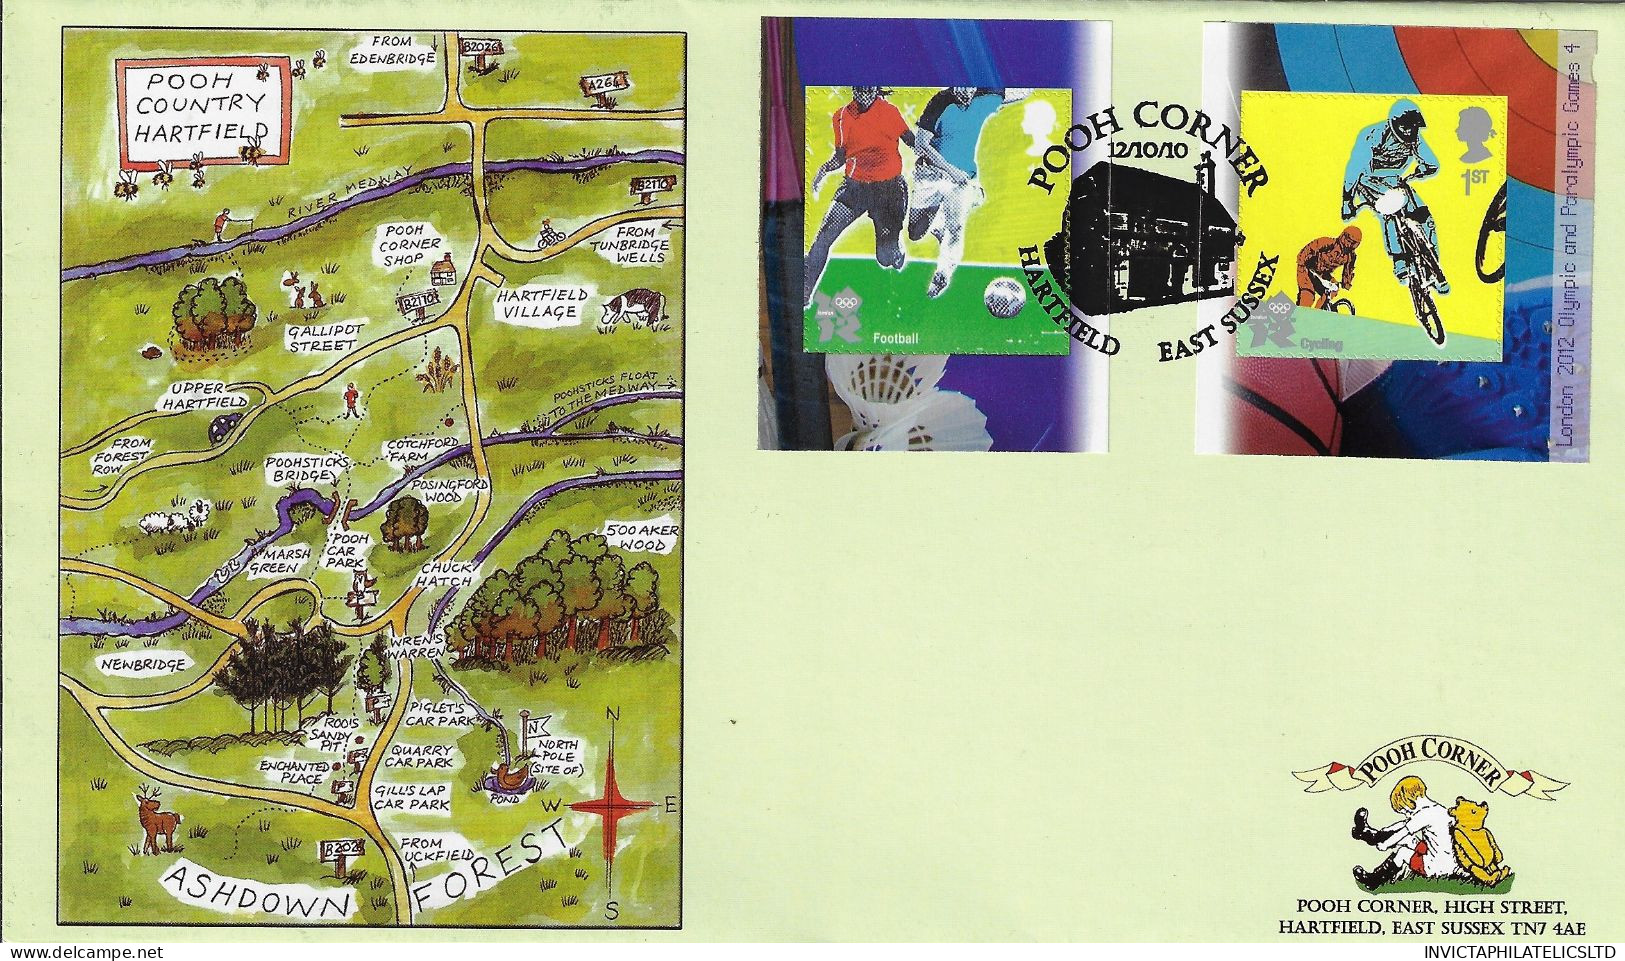 GB 2010 OLYMPIC GAMES NVI BOOKLET NO 4, VERY SCARCE POOH COUNTRY MAP FDC, FEW EXIST - 2001-2010 Dezimalausgaben